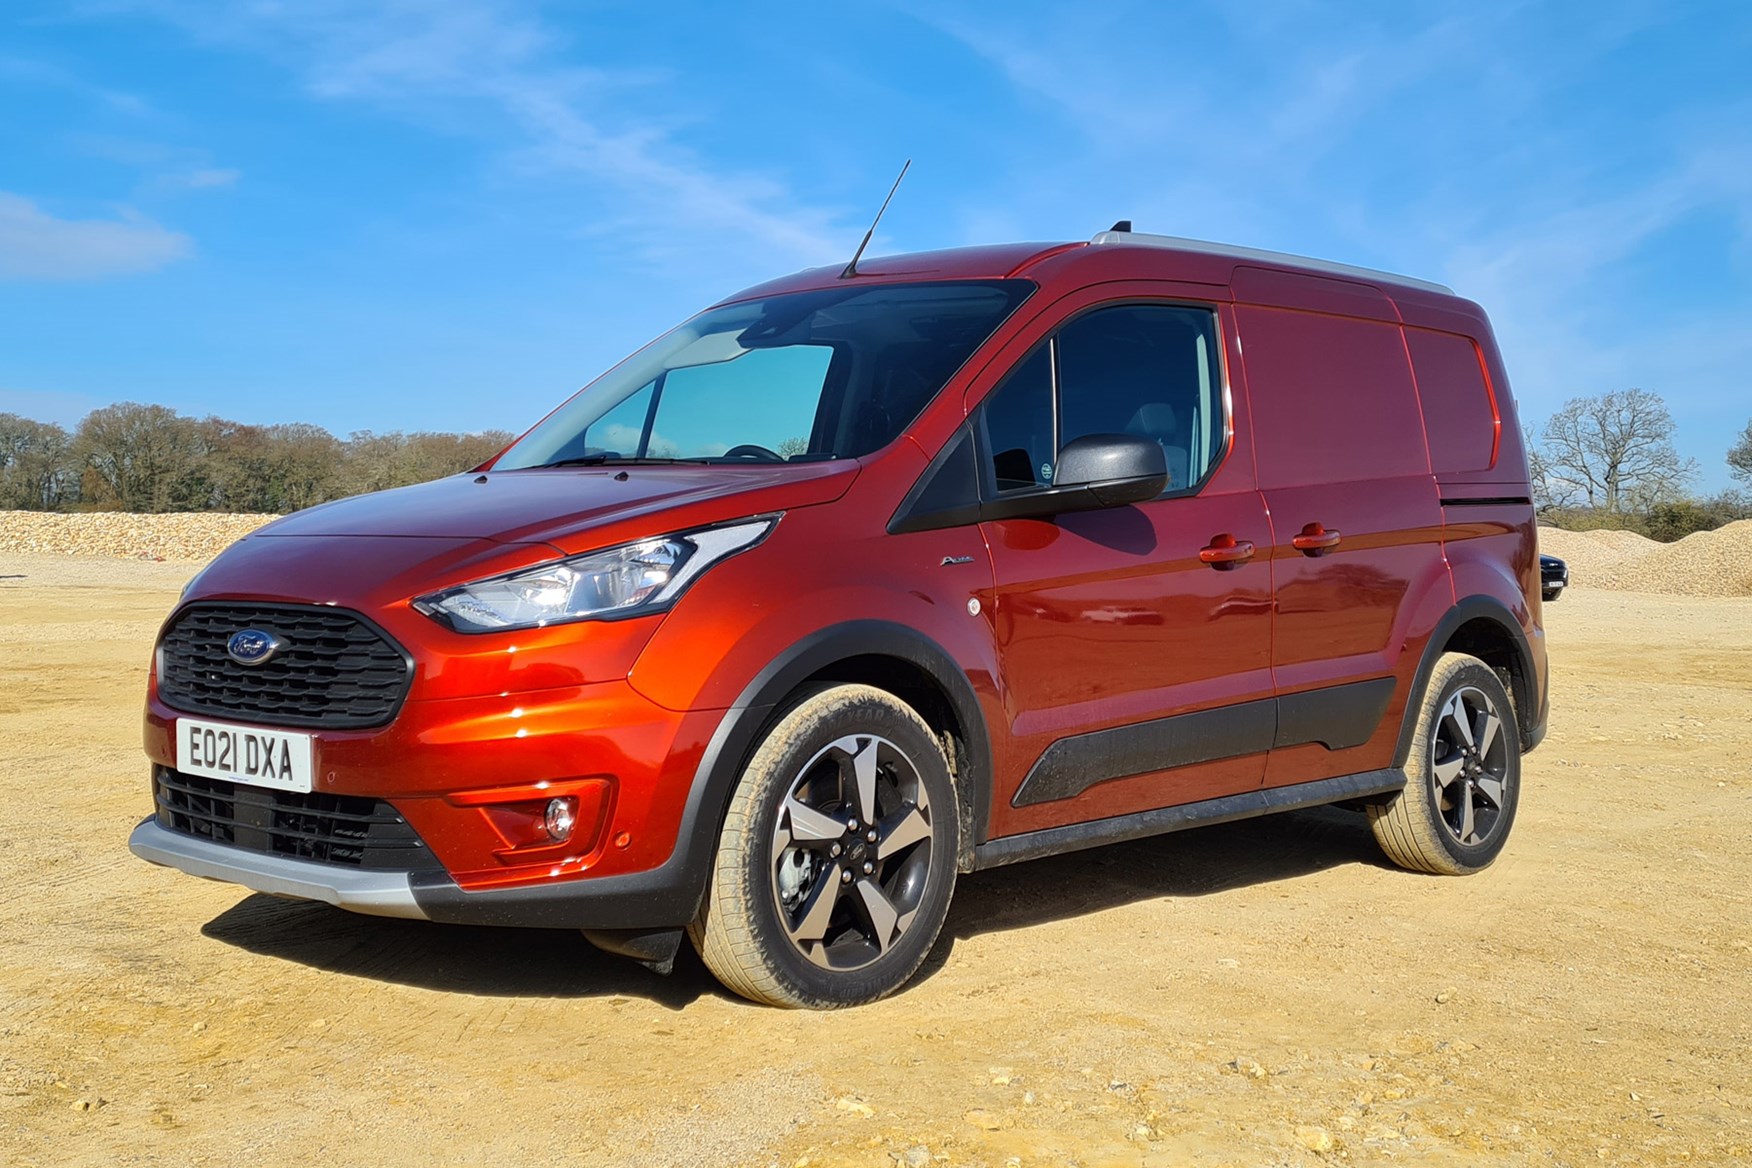 FORD INTRODUCES ACTIVE RANGE TO TOURNEO AND TRANSIT CONNECT WITH